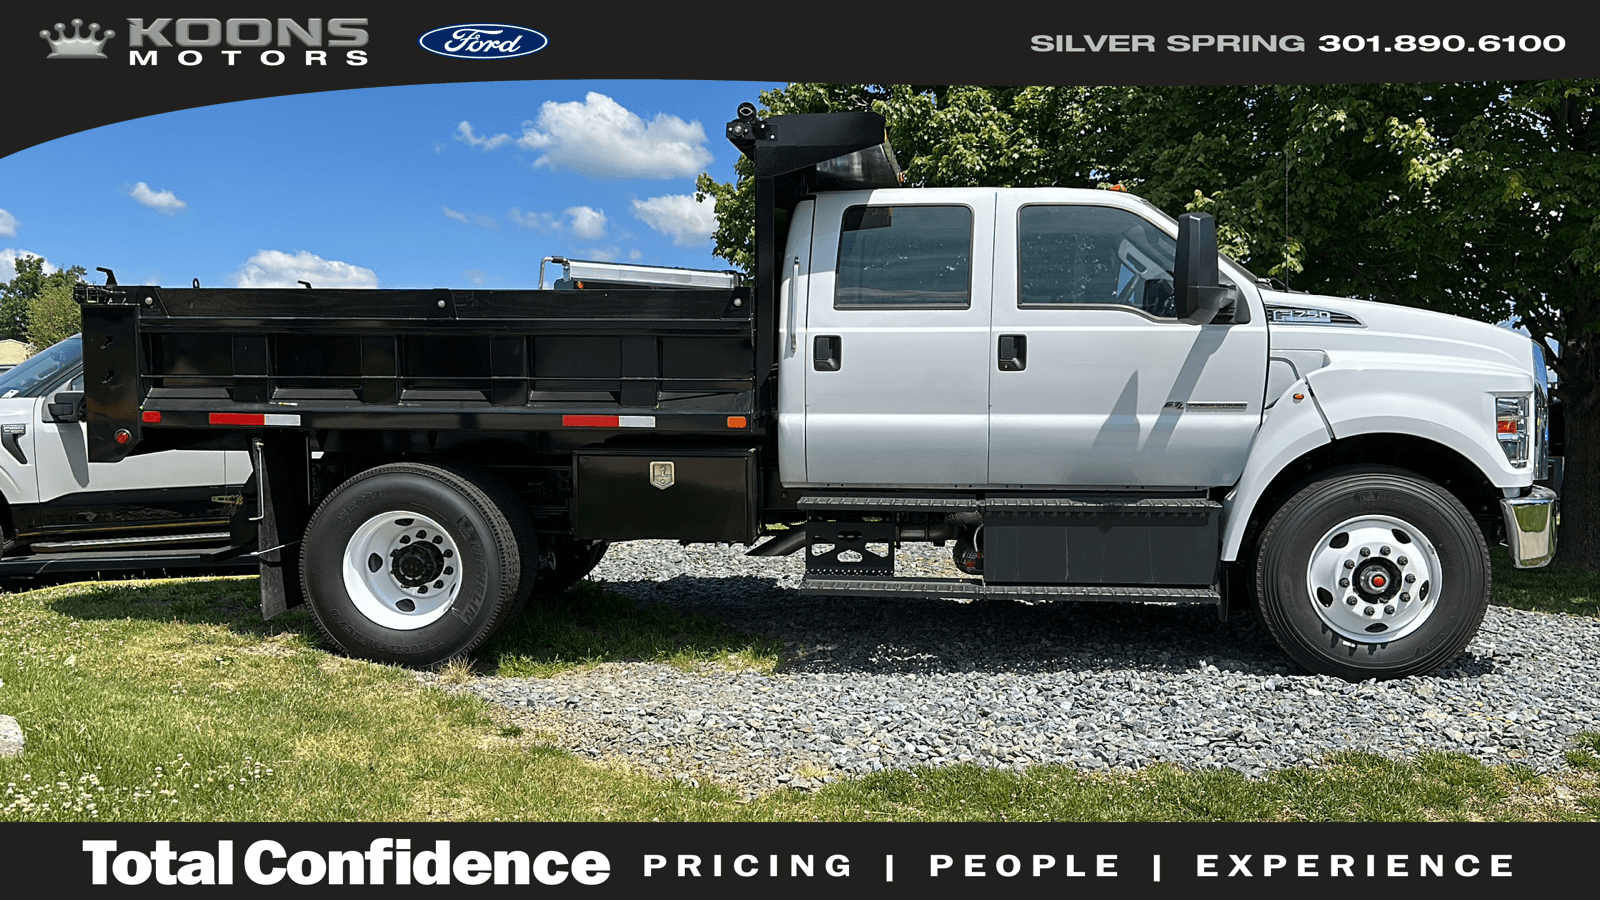 2024 Ford F-650, F-750 Photo in Silver Spring, MD 20904